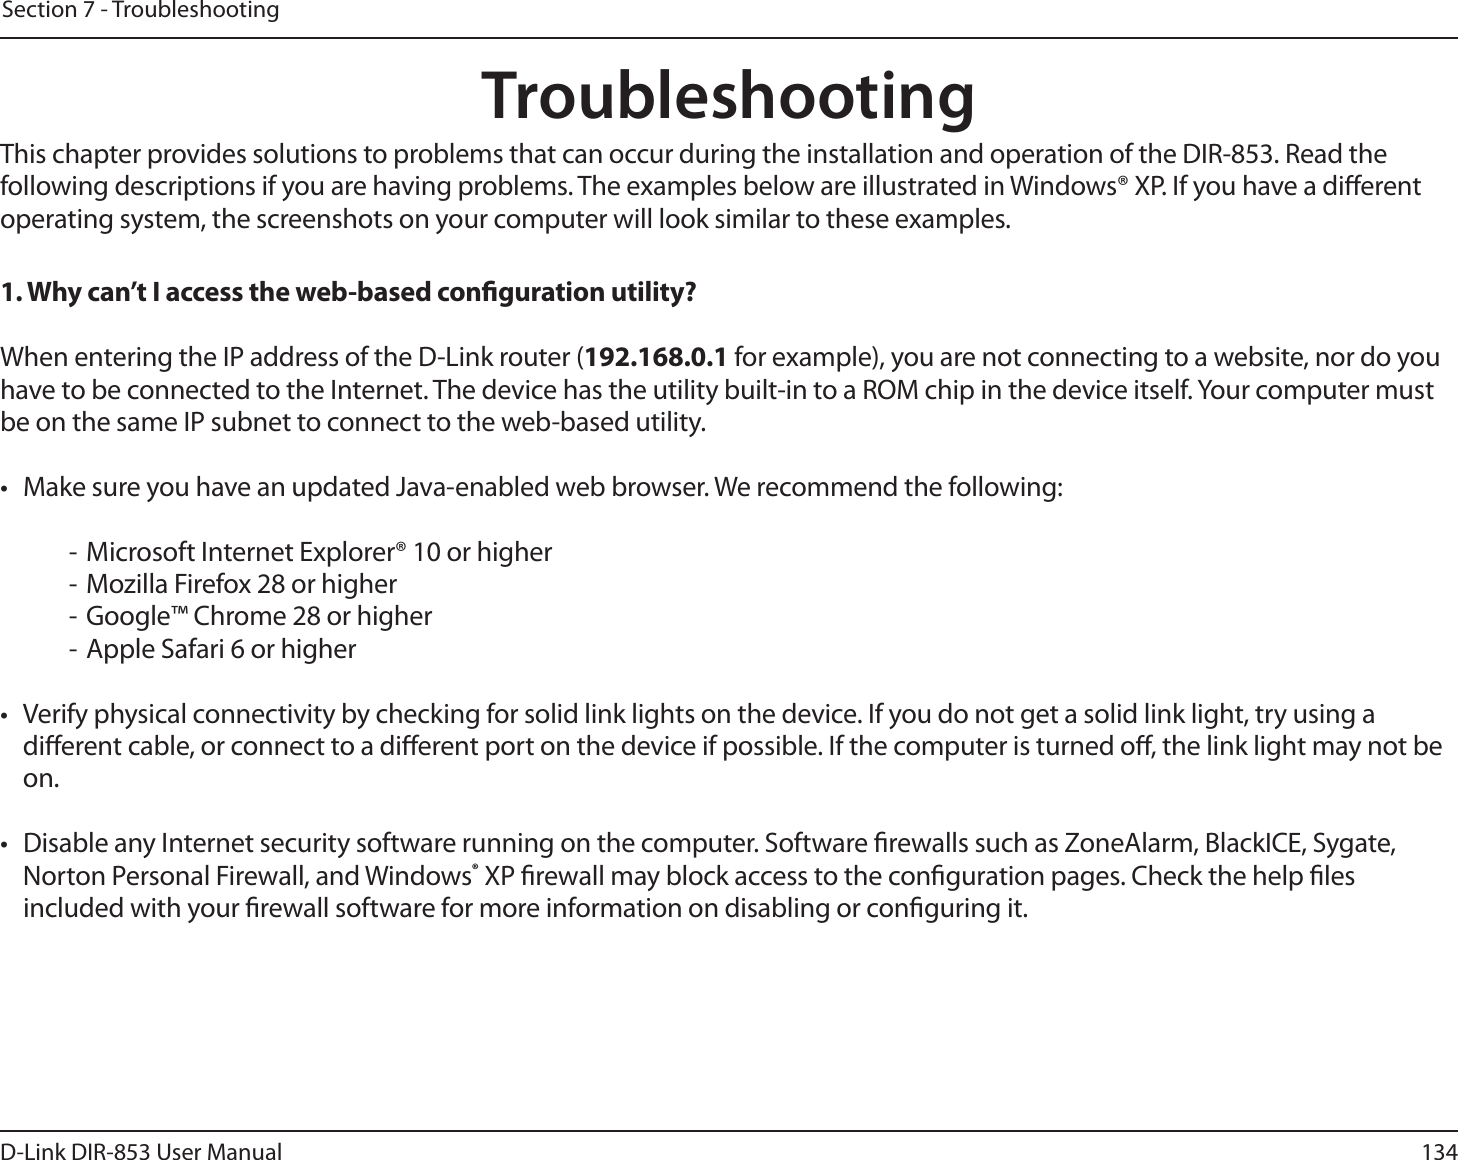 134D-Link DIR-853 User ManualSection 7 - TroubleshootingTroubleshootingThis chapter provides solutions to problems that can occur during the installation and operation of the DIR-853. Read the following descriptions if you are having problems. The examples below are illustrated in Windows® XP. If you have a dierent operating system, the screenshots on your computer will look similar to these examples.1. Why can’t I access the web-based conguration utility?When entering the IP address of the D-Link router (192.168.0.1 for example), you are not connecting to a website, nor do you have to be connected to the Internet. The device has the utility built-in to a ROM chip in the device itself. Your computer must be on the same IP subnet to connect to the web-based utility. •  Make sure you have an updated Java-enabled web browser. We recommend the following:  - Microsoft Internet Explorer® 10 or higher- Mozilla Firefox 28 or higher- Google™ Chrome 28 or higher- Apple Safari 6 or higher•  Verify physical connectivity by checking for solid link lights on the device. If you do not get a solid link light, try using a dierent cable, or connect to a dierent port on the device if possible. If the computer is turned o, the link light may not be on.•  Disable any Internet security software running on the computer. Software rewalls such as ZoneAlarm, BlackICE, Sygate, Norton Personal Firewall, and Windows® XP rewall may block access to the conguration pages. Check the help les included with your rewall software for more information on disabling or conguring it.